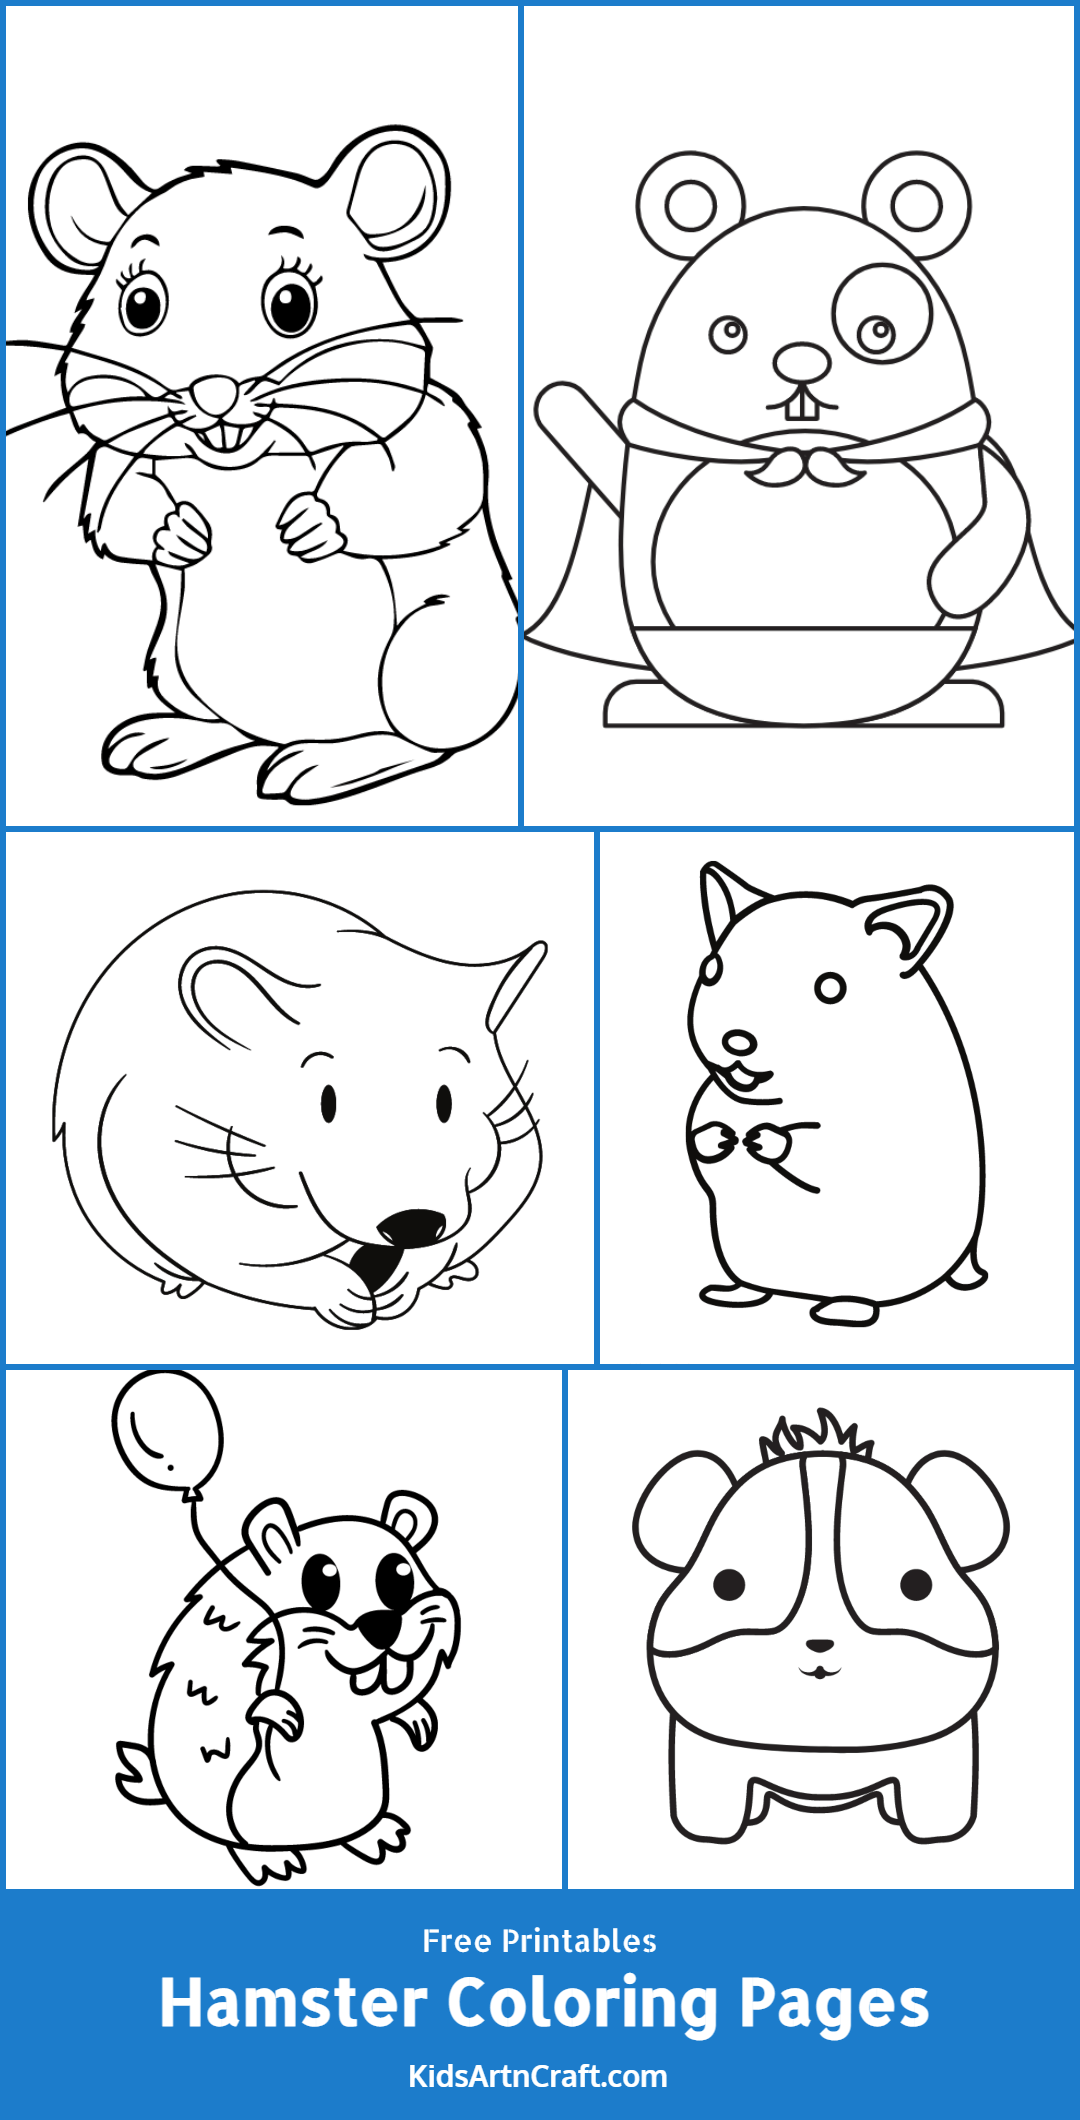 Hamster Coloring Pages For Kids – Free Printables